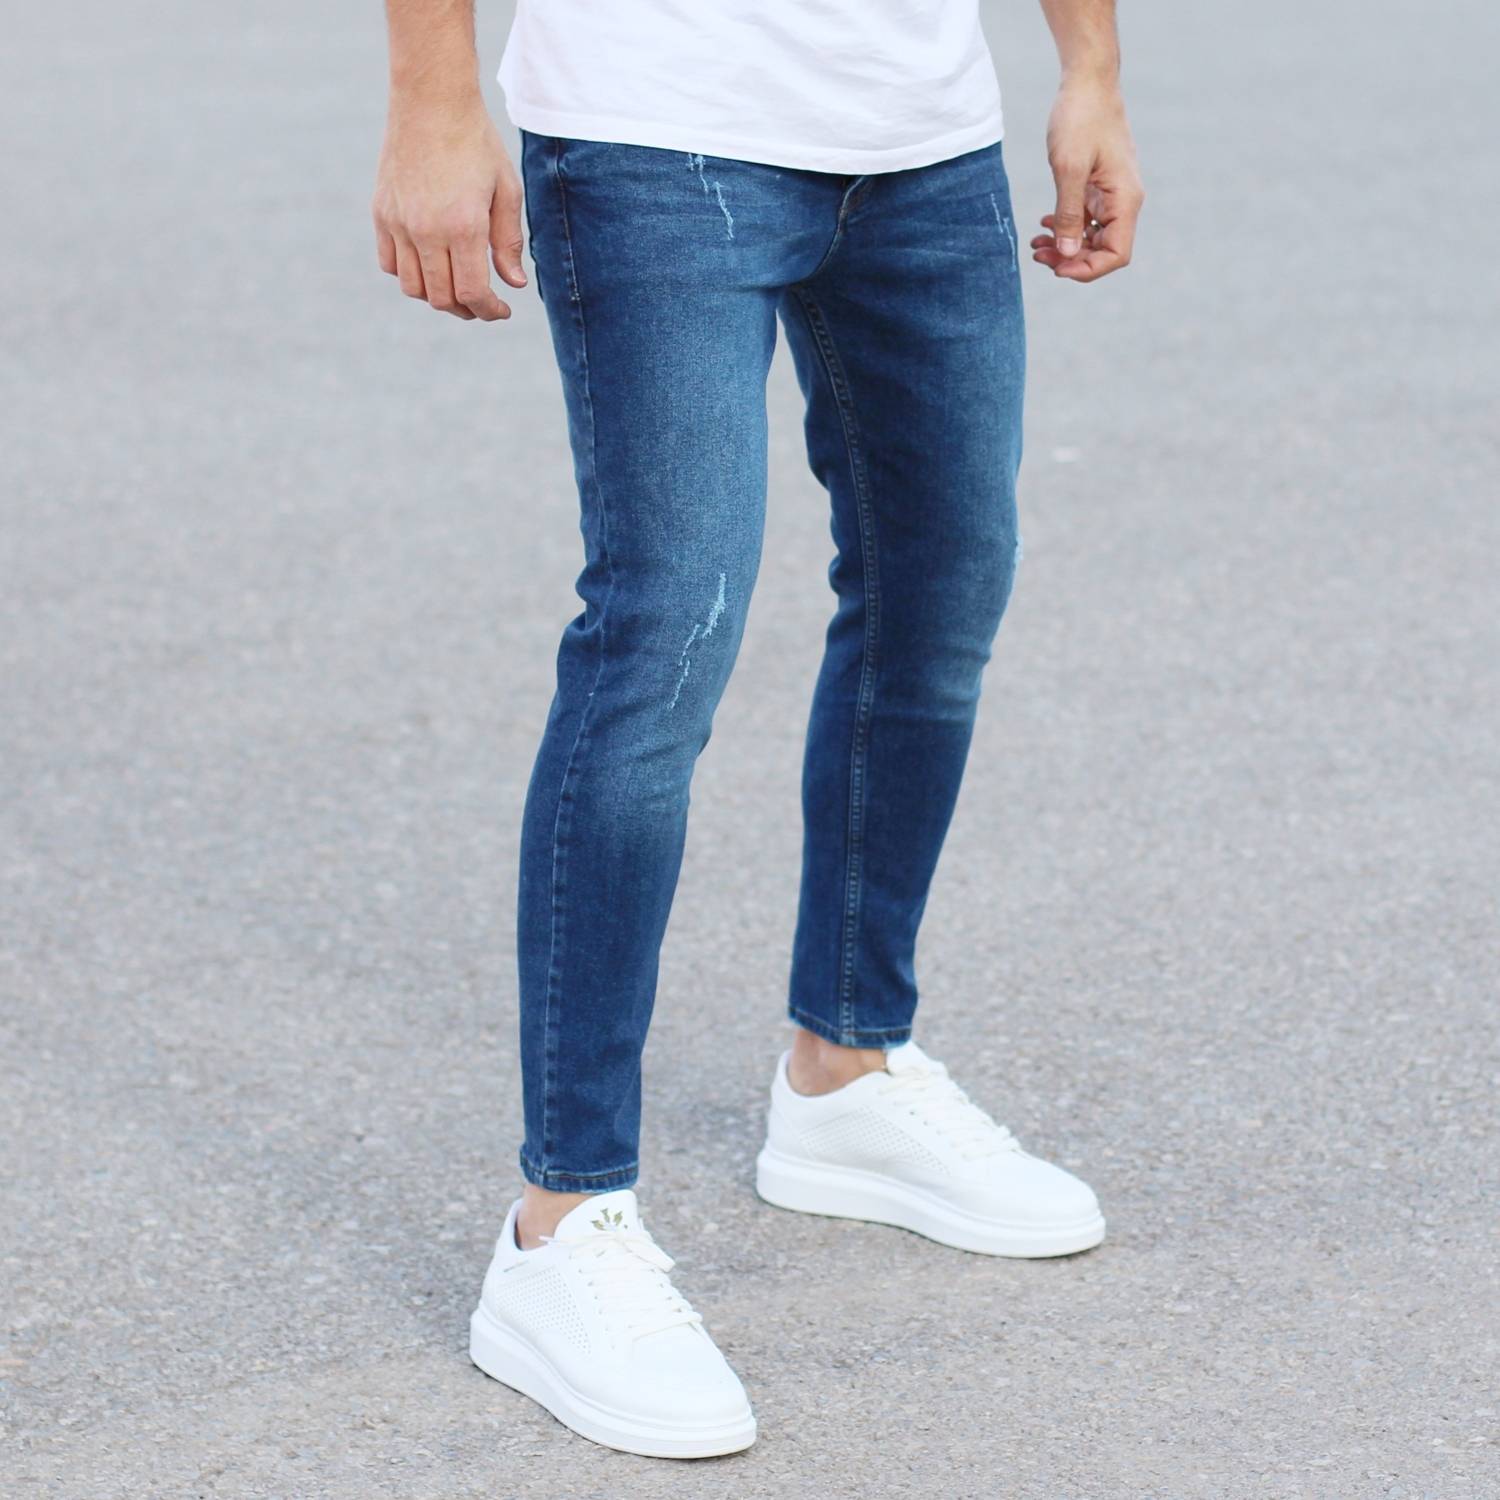 blue sneakers with blue jeans